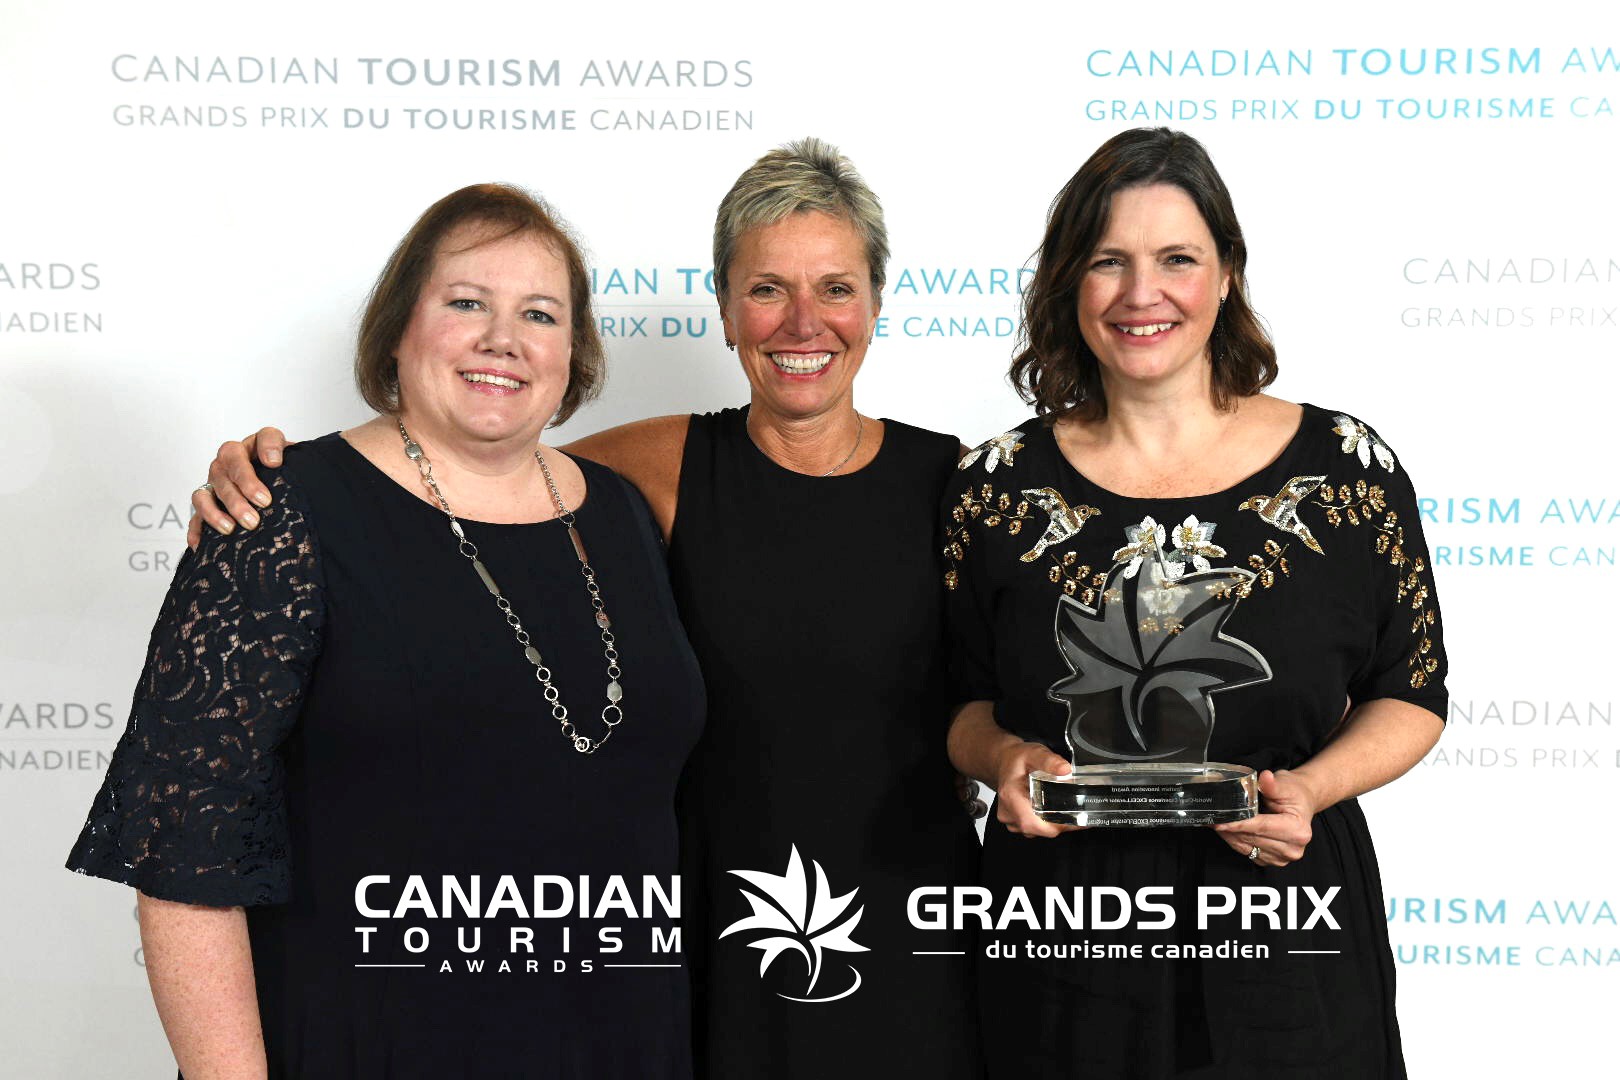 Darlene MacDonald and Heather Yule accept the Tourism Innovation Award at the Canadian Tourism Awards